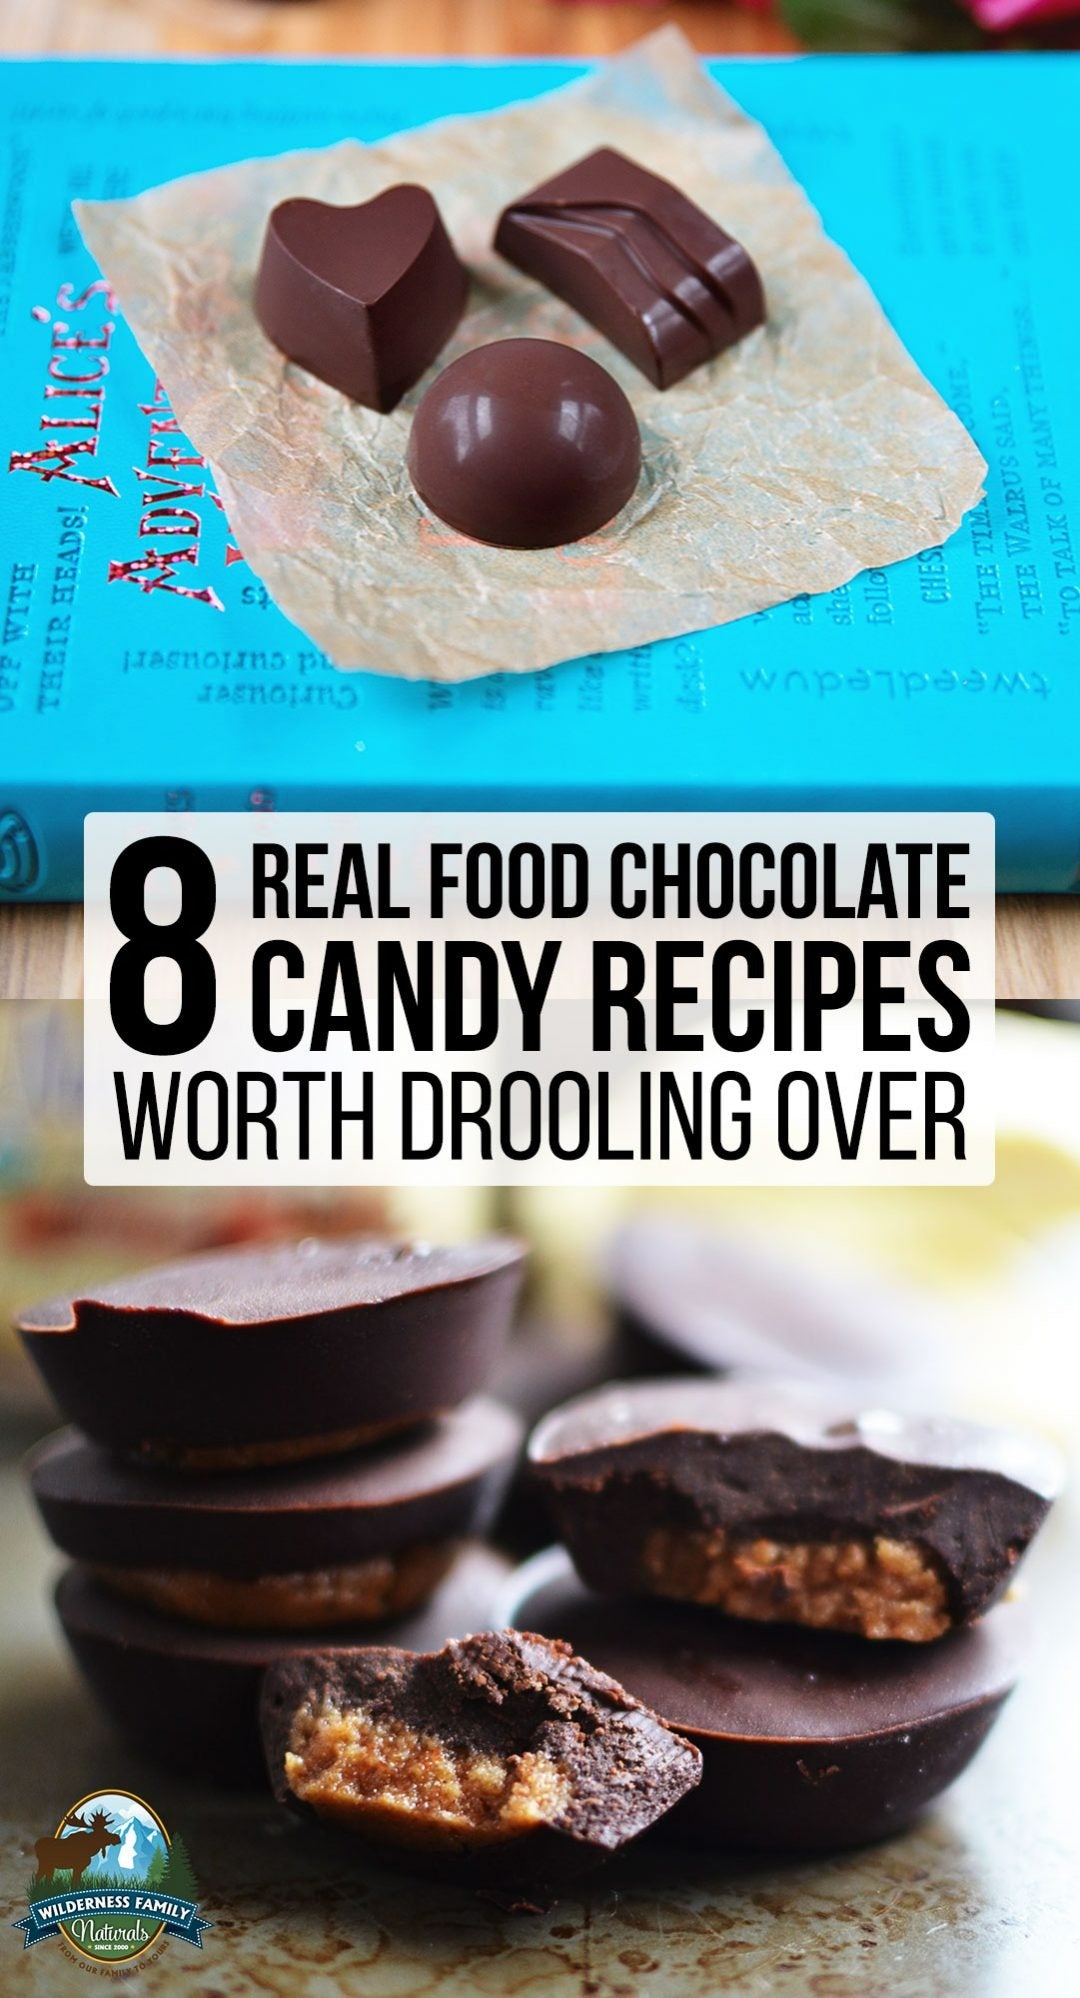 8 Real Food Chocolate Candy Recipes Worth Drooling Over